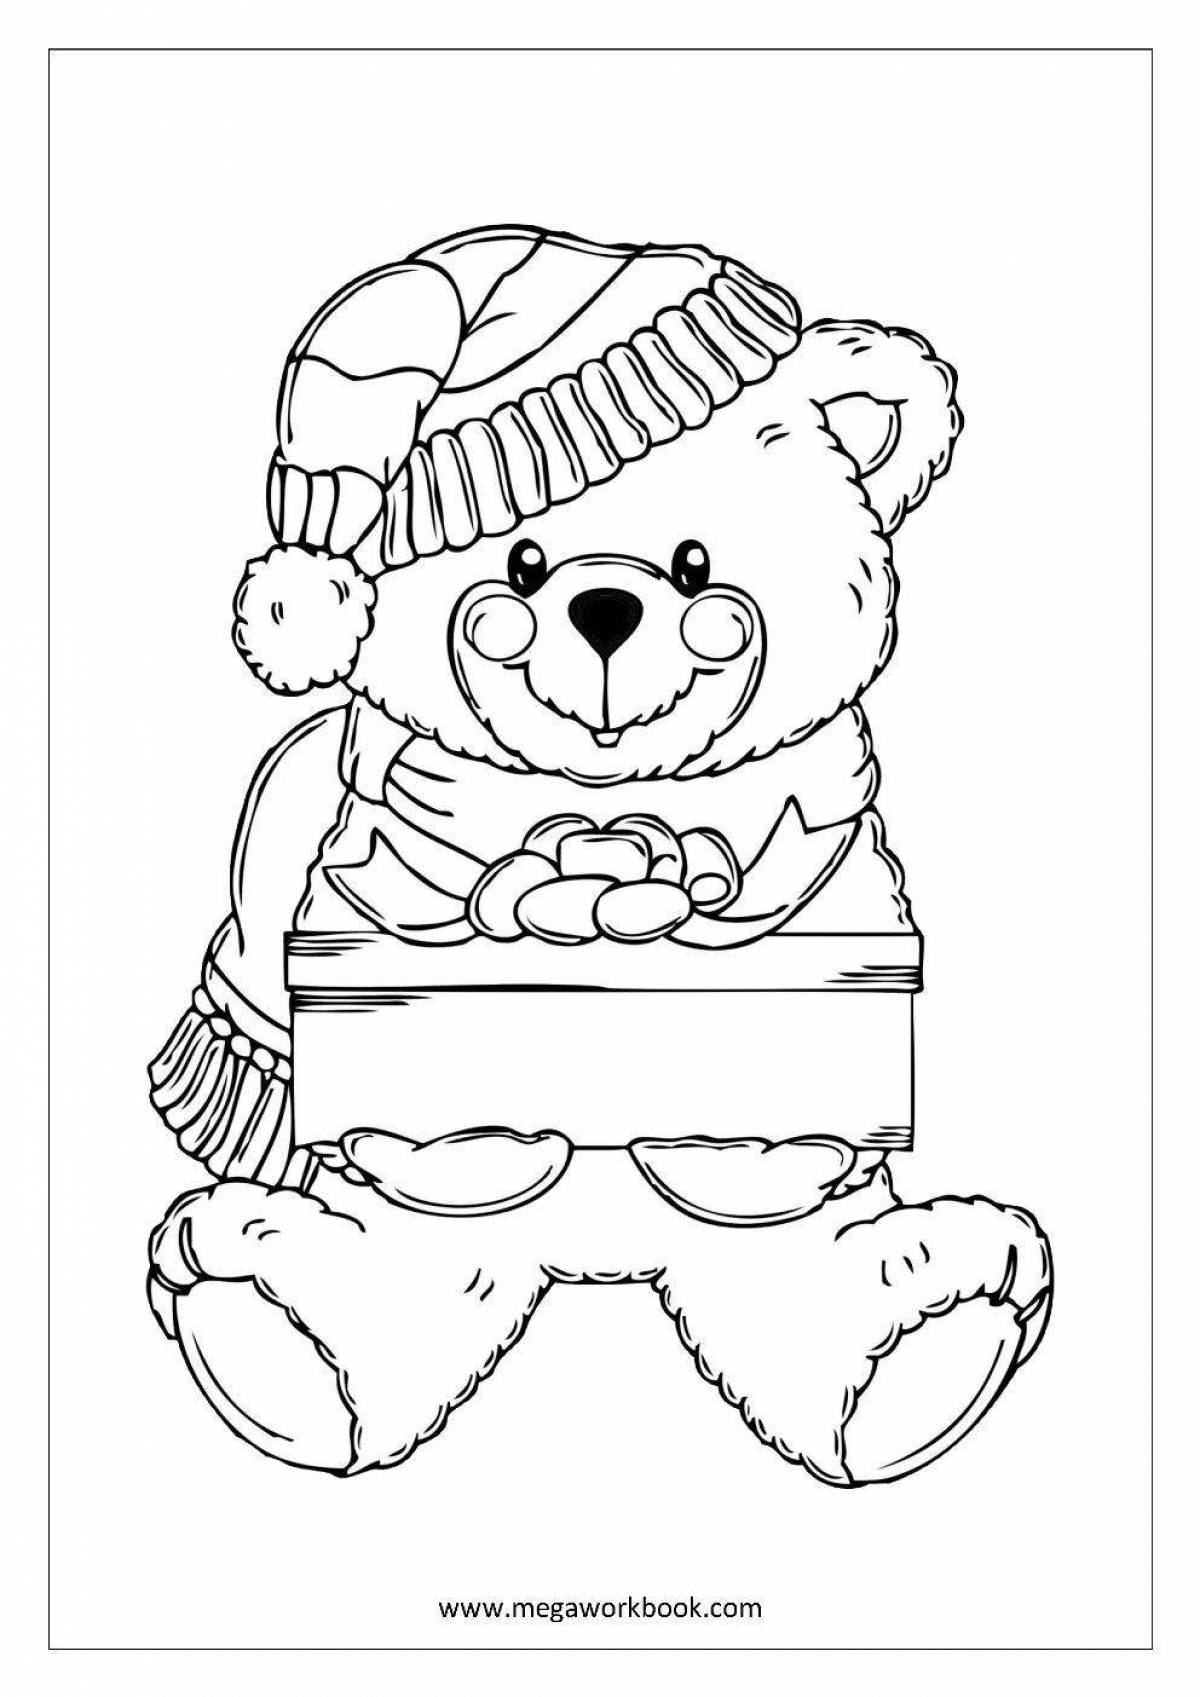 Coloring book bright bear with a bow